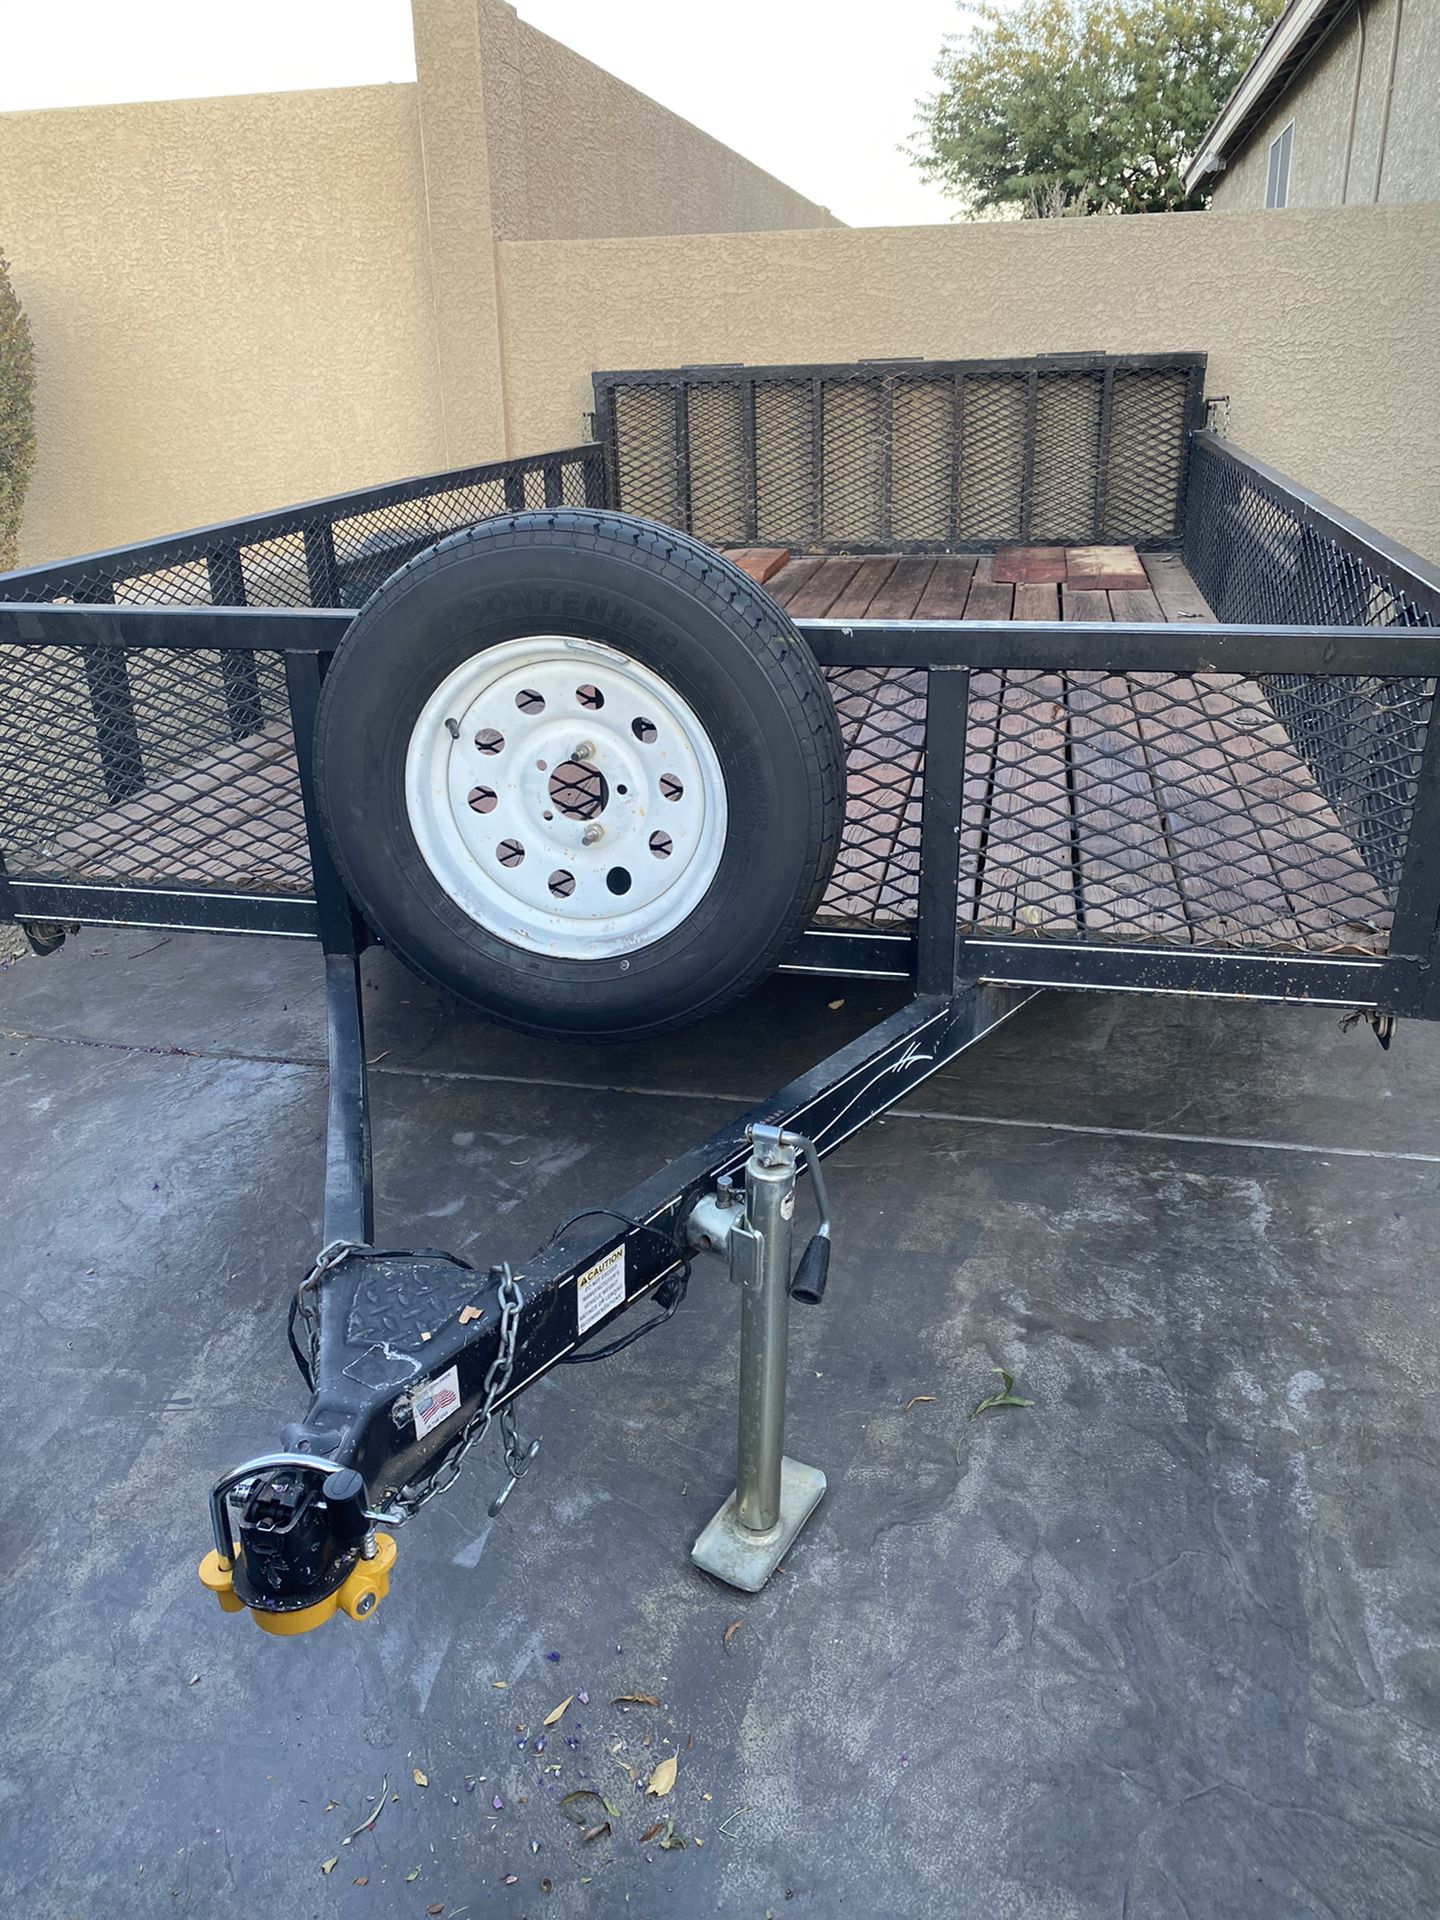 Trailer For Sale